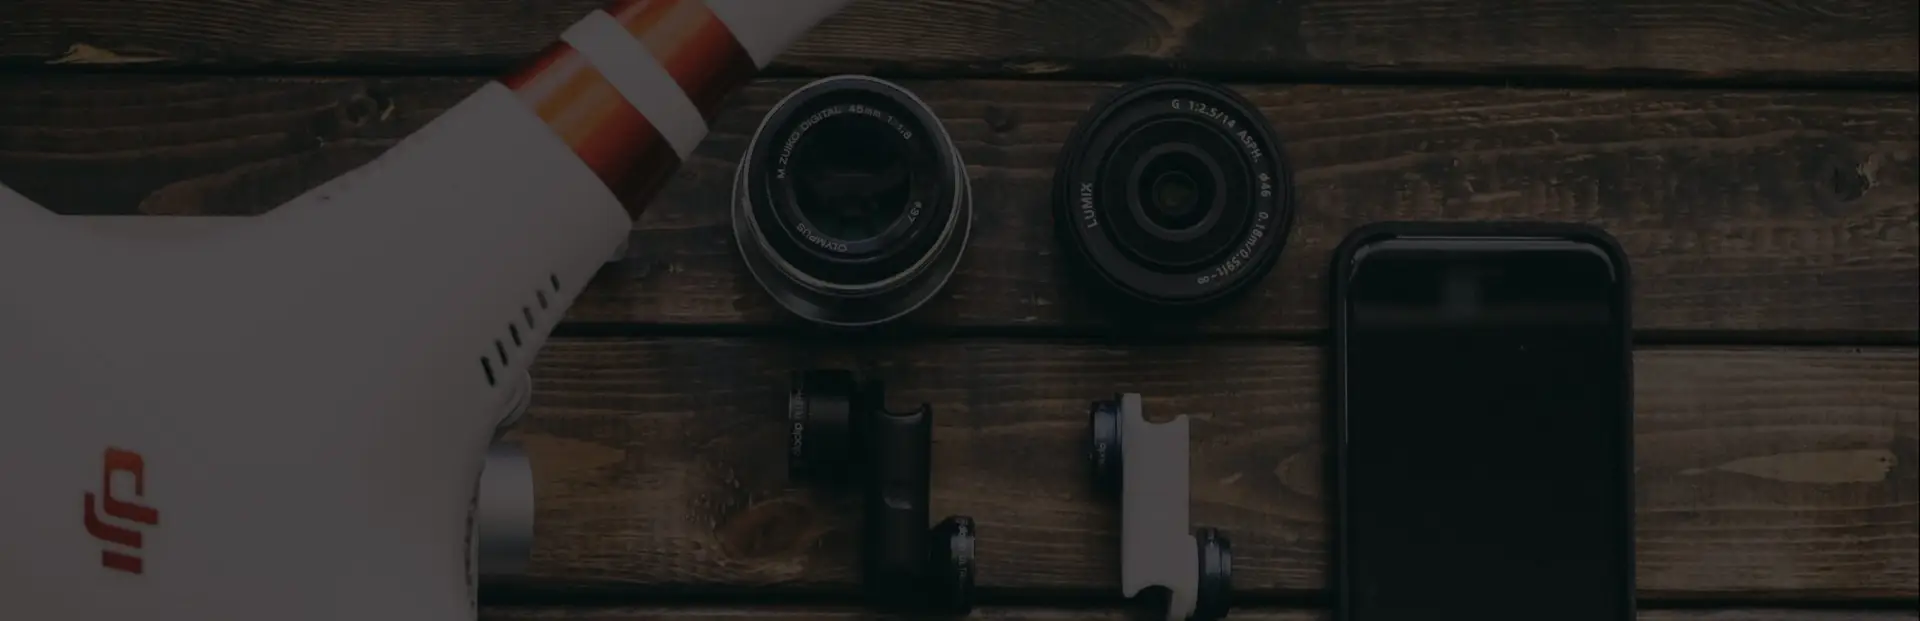 A sleek drone, interchangeable camera lenses, and a smartphone laid out on a rustic wooden surface for a tech review feature at BuildBrandsOnline.com.